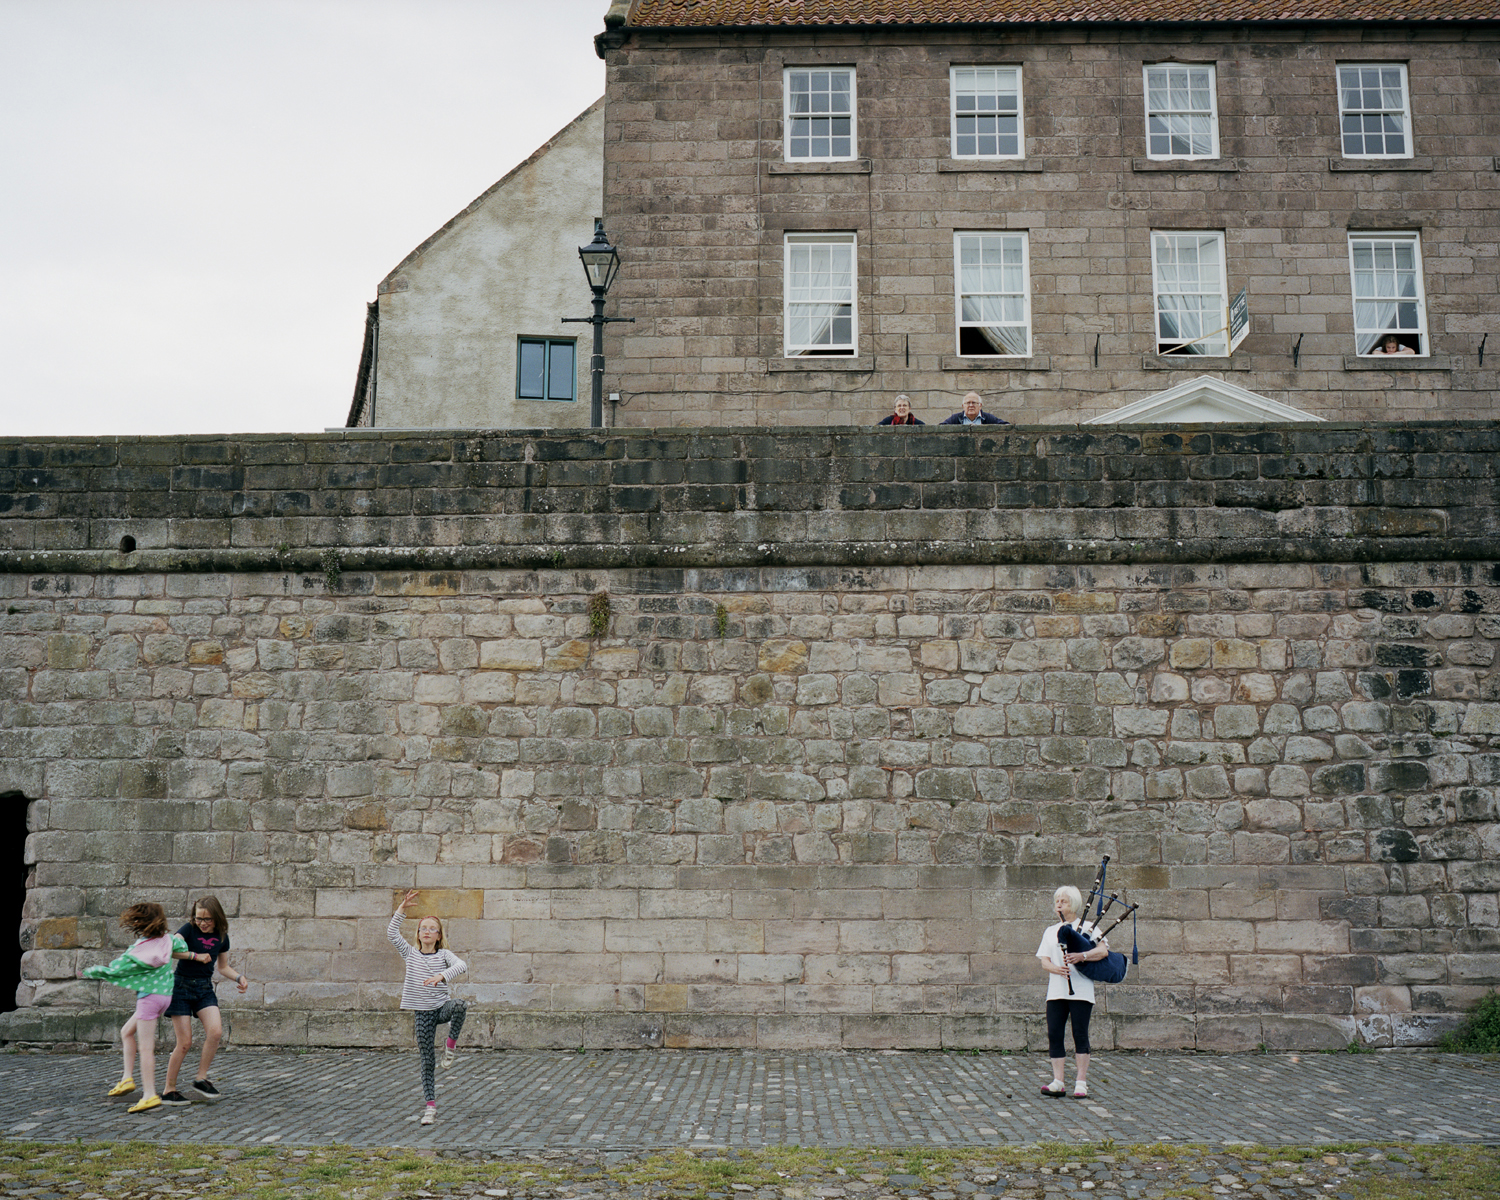 Iris playing bagpipes outside Berwick-Upon-Tweed’s town walls, which were built in the early 14th century under Edward I, following his capture of the city from the Scots.